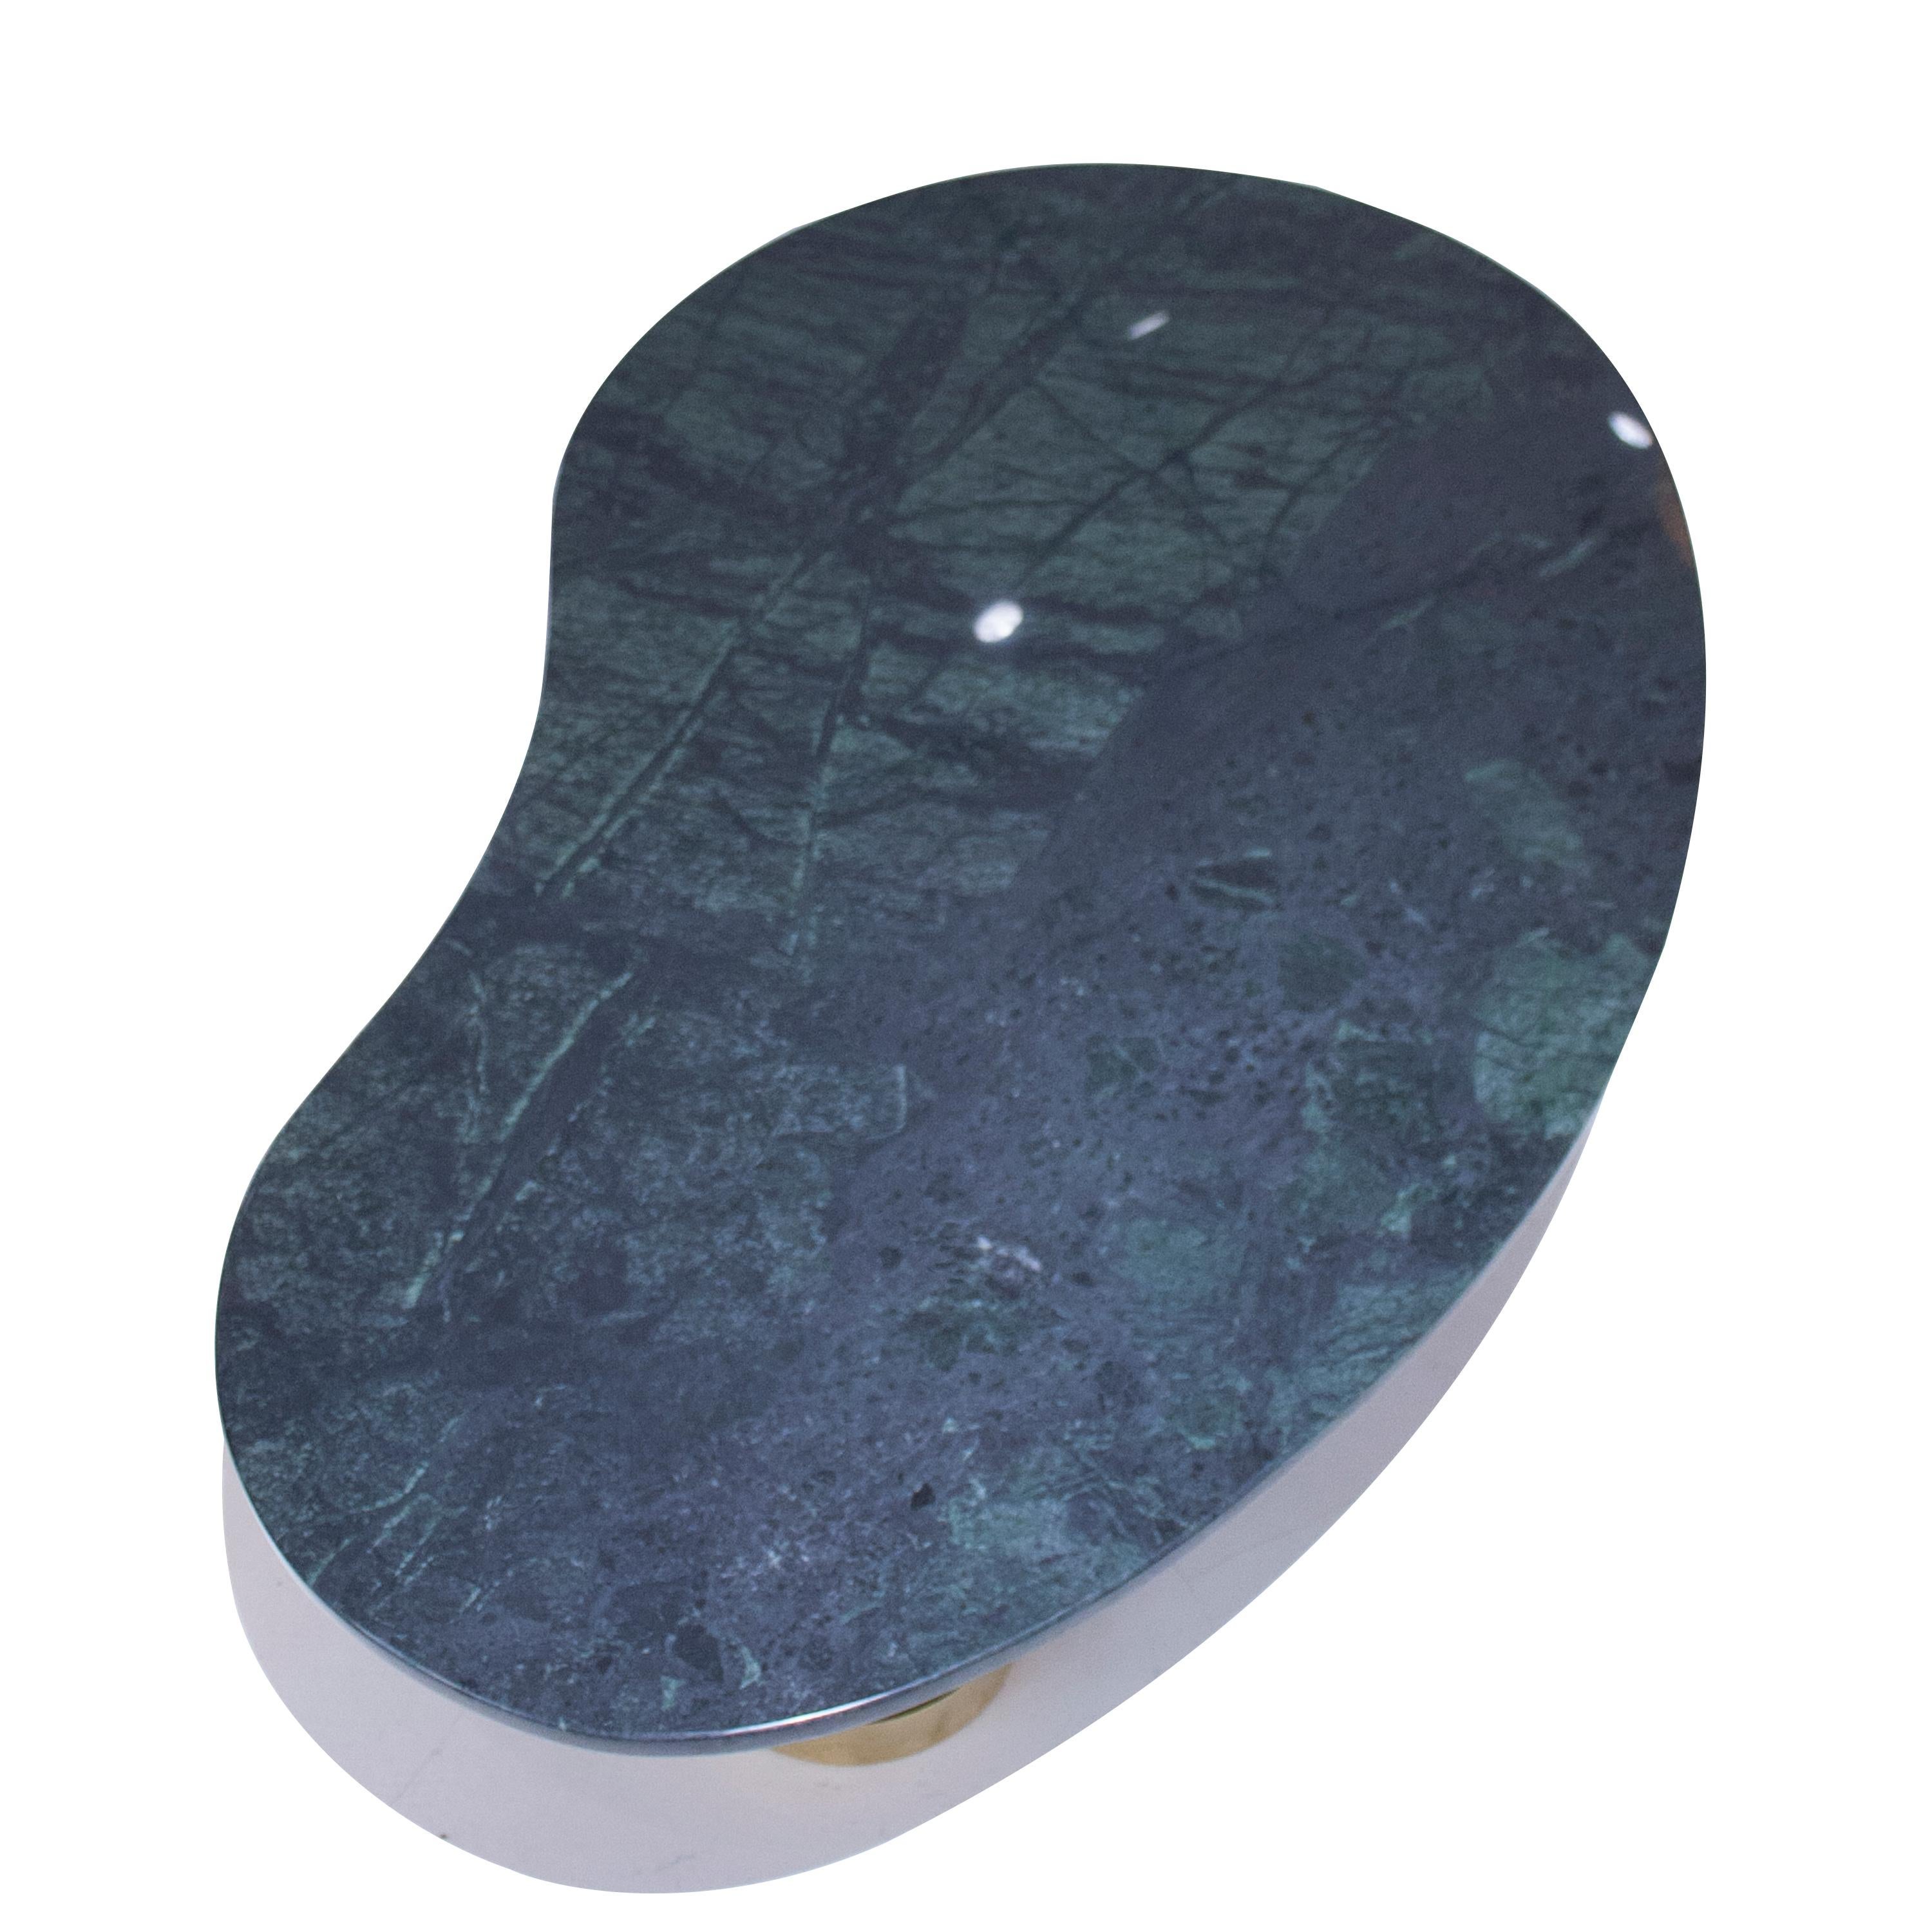 Spanish IKB191 Contemporary Green Marble Center Table, Spain, 2022